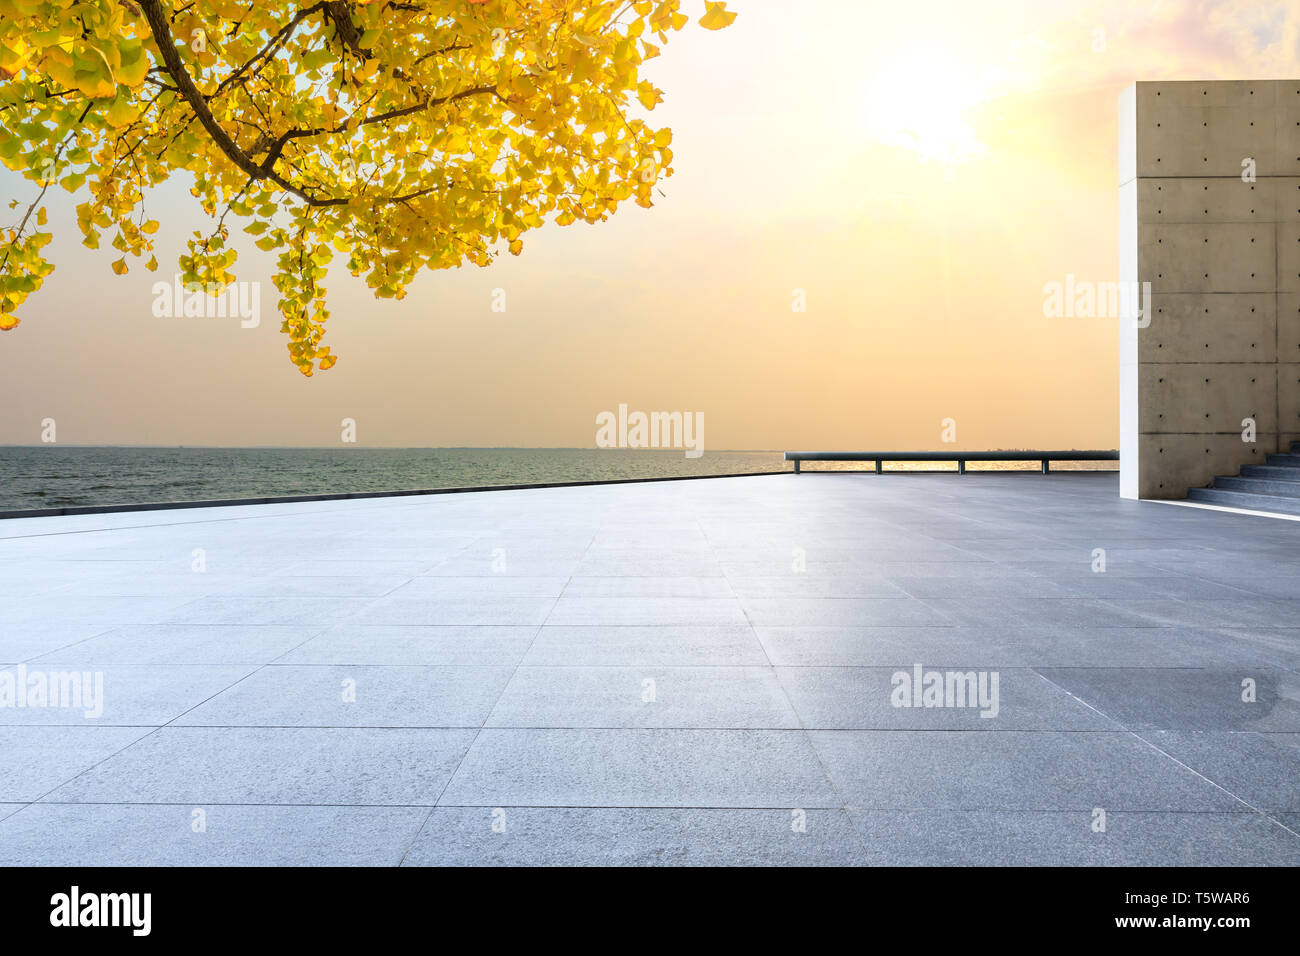 Empty Square Floors And River With Yellow Ginkgo Background Stock